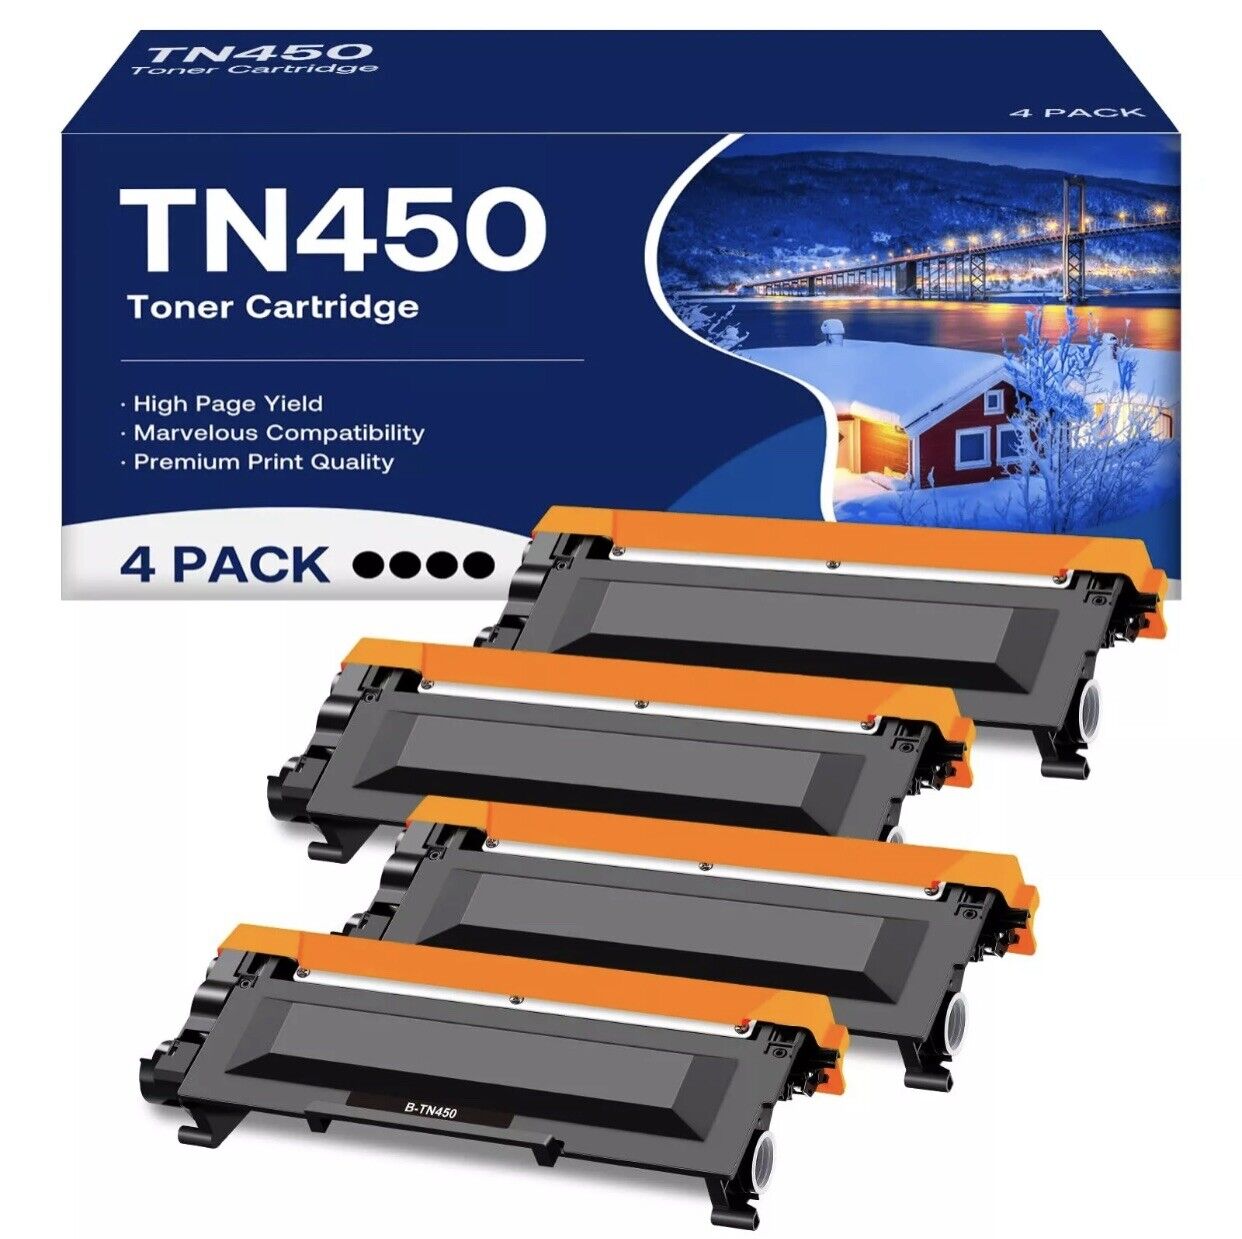 Compatible Toner Catridge Replacement for Brother TN450 (Black, 4-Pack)